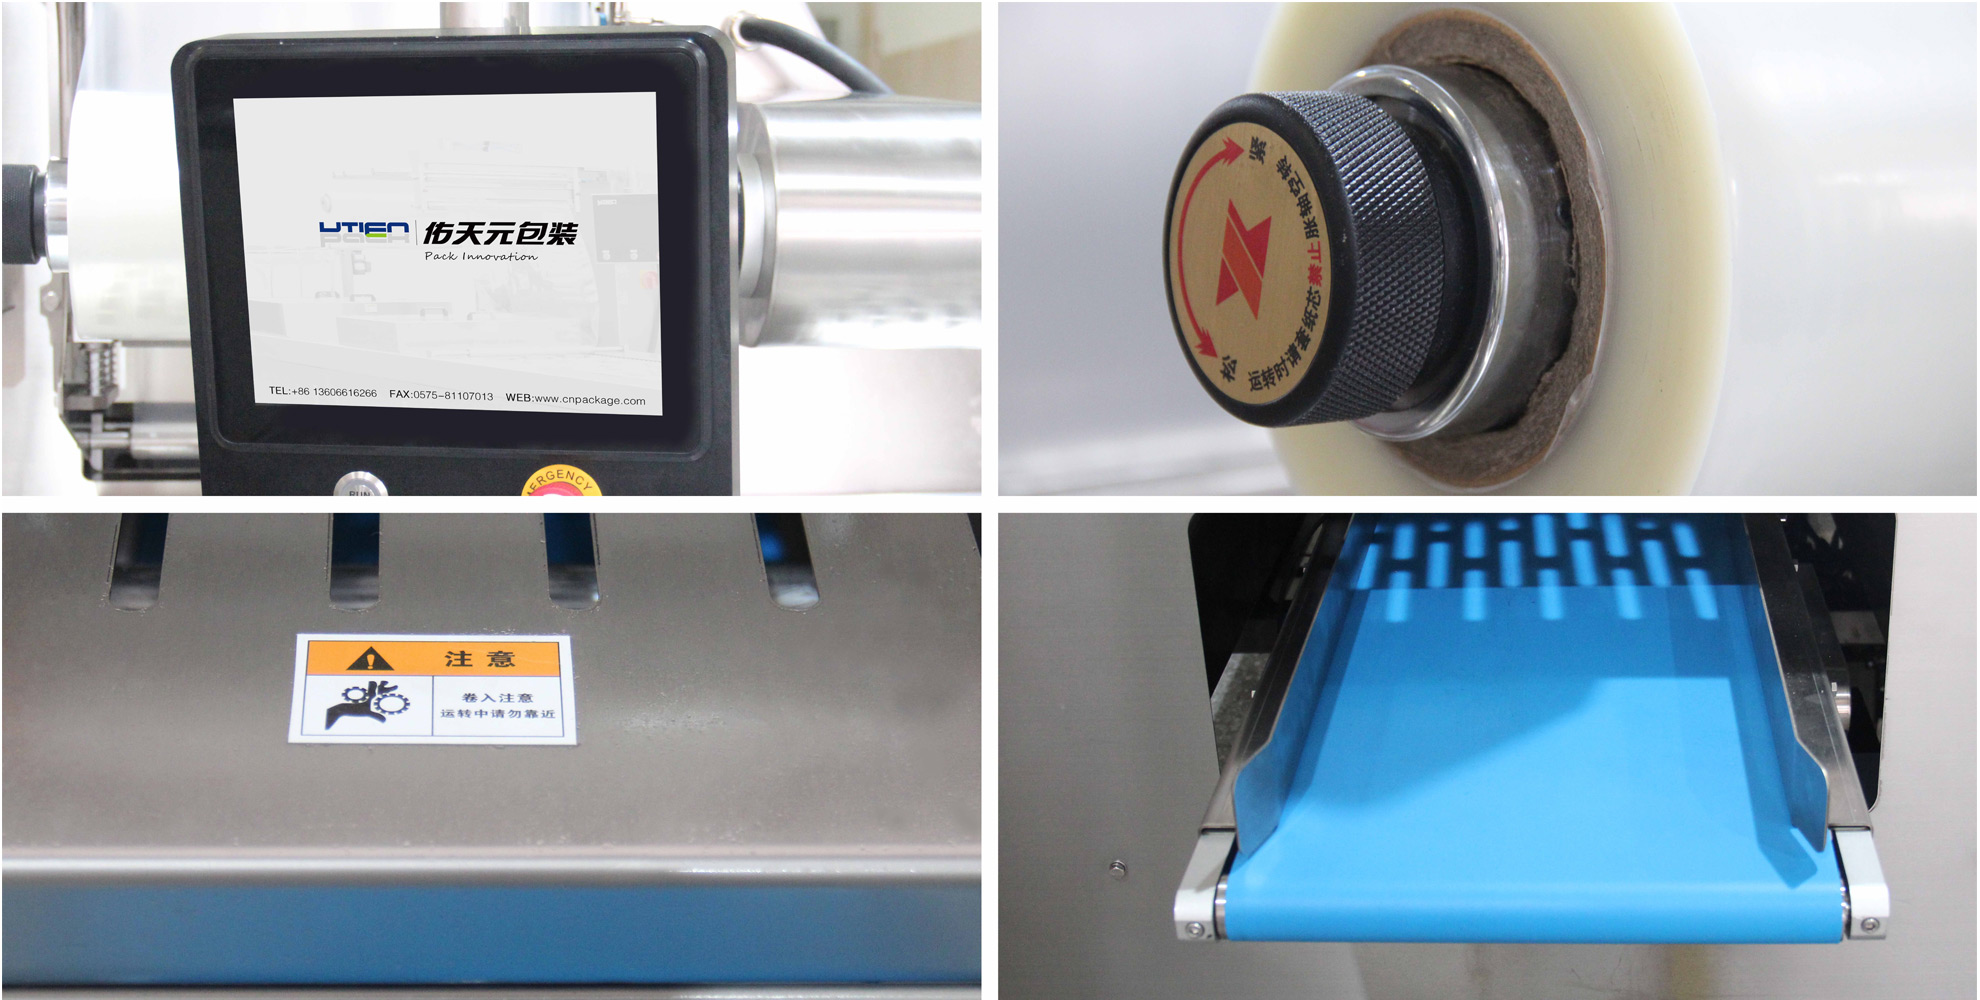 Automatic food tray sealing machine | thermoformer for sale | vacuum packaging machinery - Utien